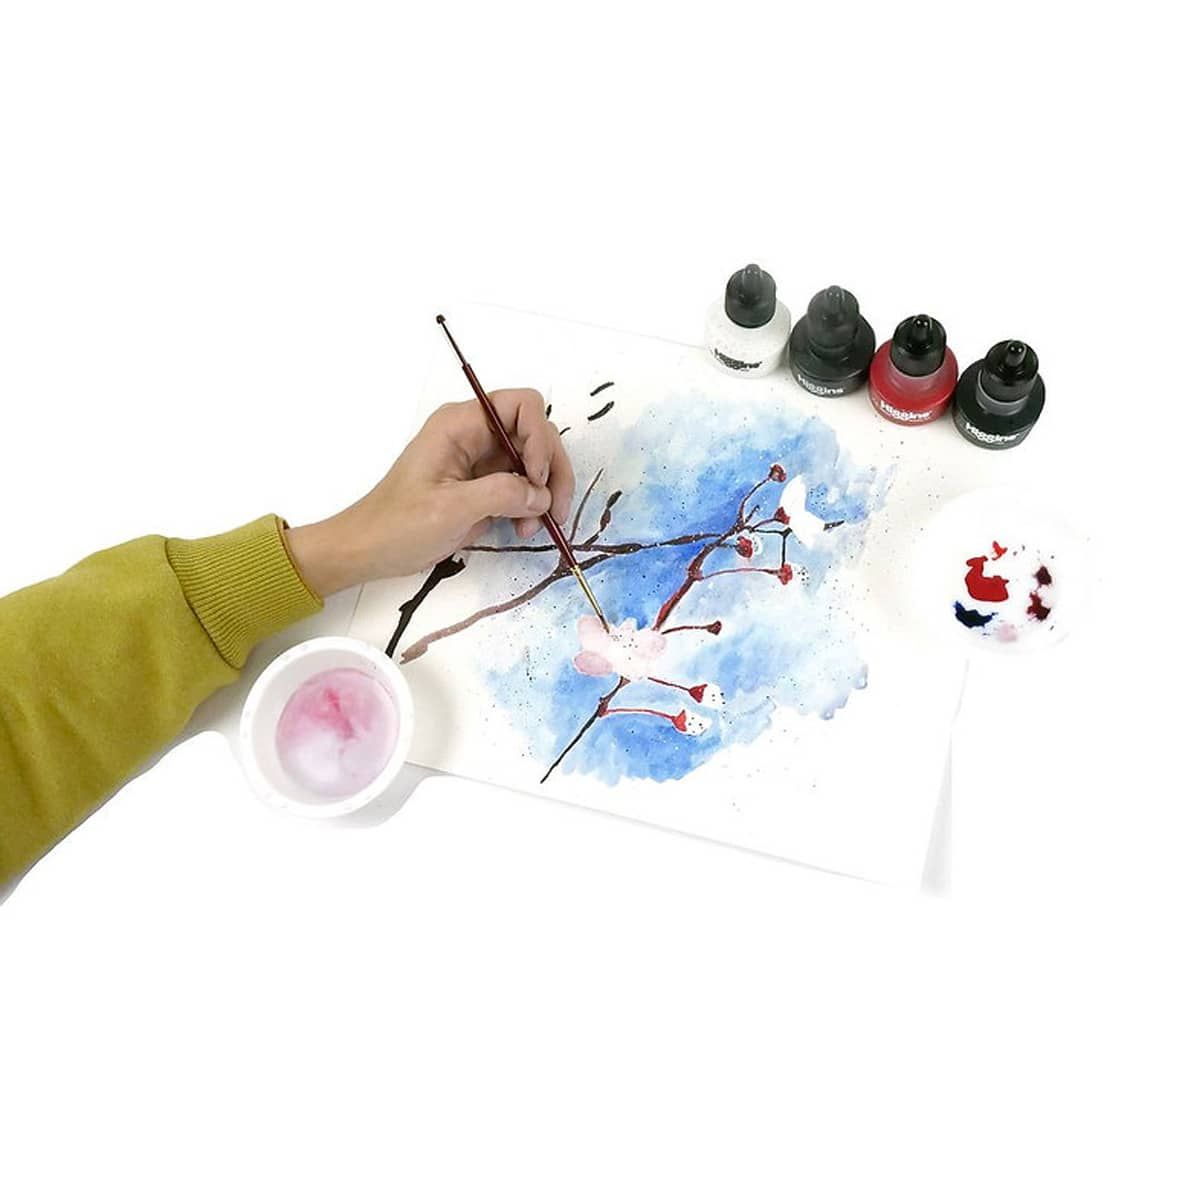 Great for sketching, drawing and mixed-media!